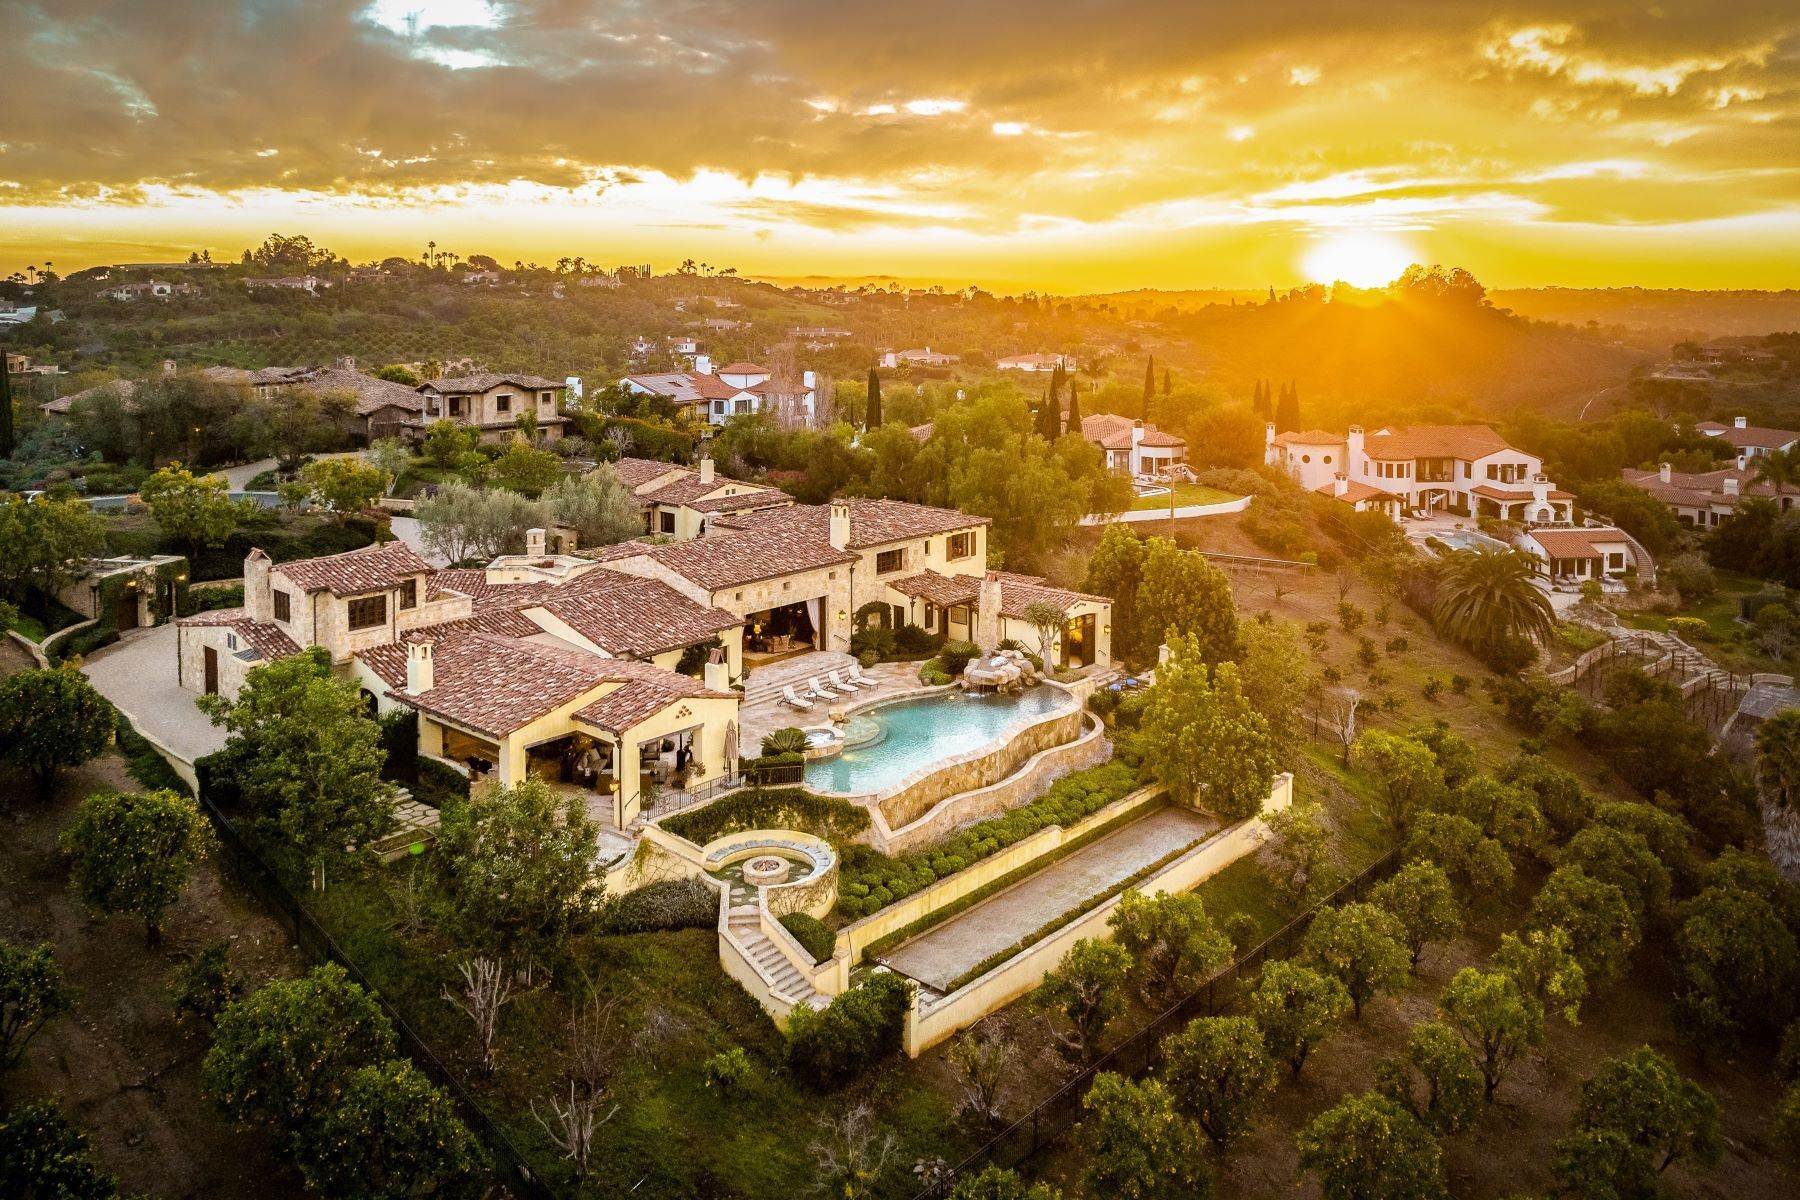 Single Family Homes for Sale at Your Ultimate Luxury Retreat Your Ultimate Luxury Retreat, Rancho Santa Fe, California 92091 United States